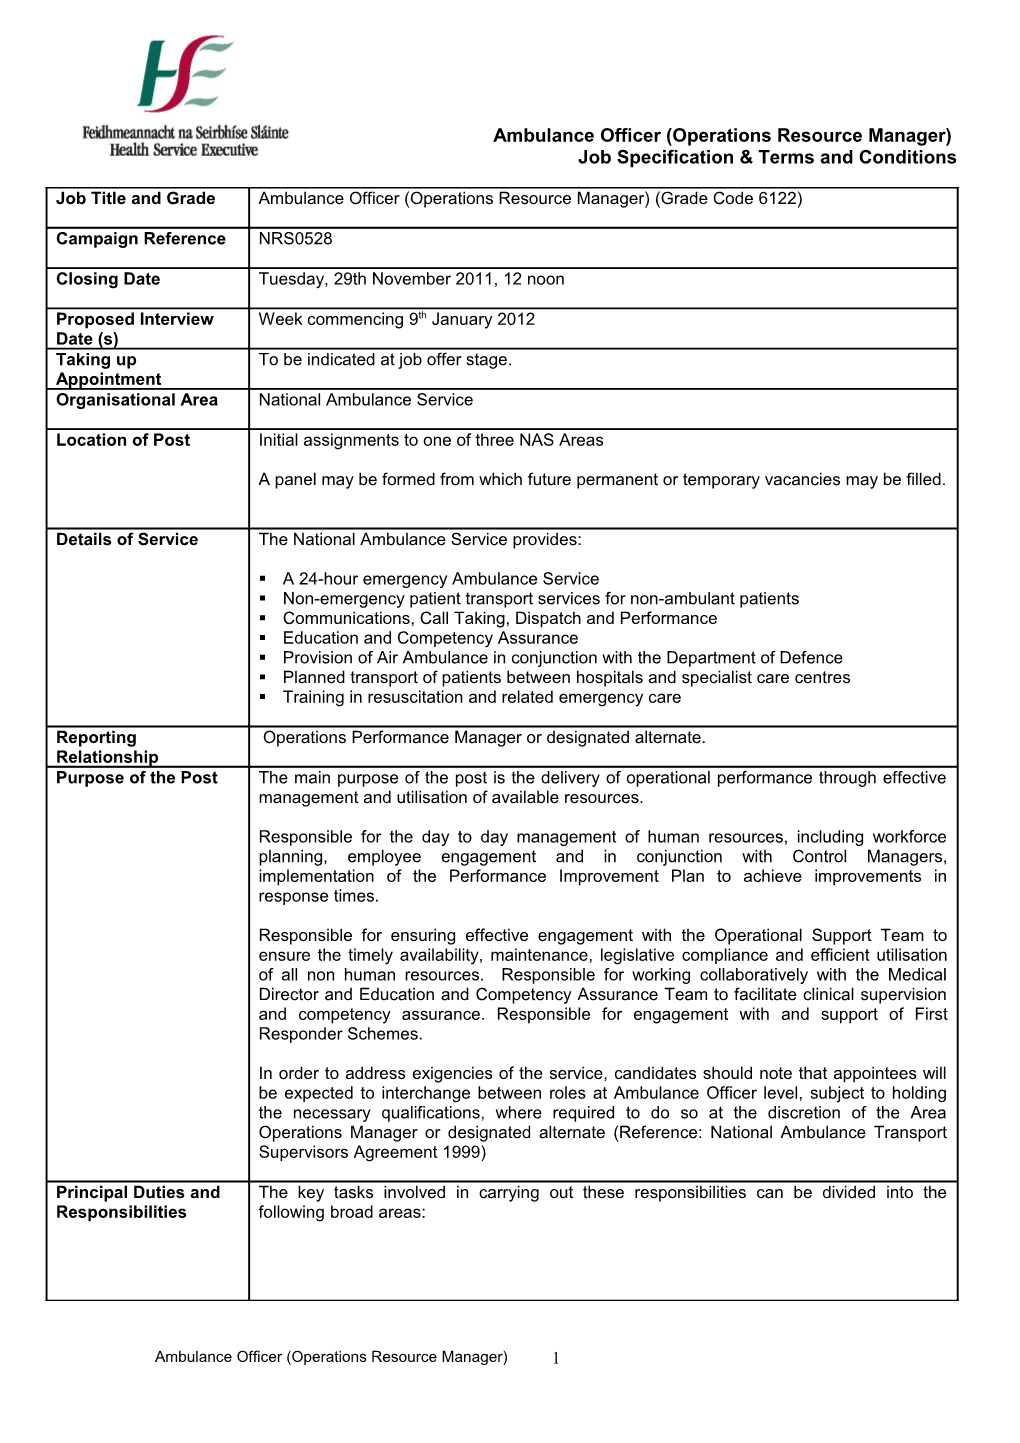 Job Specification & Terms and Conditions s5